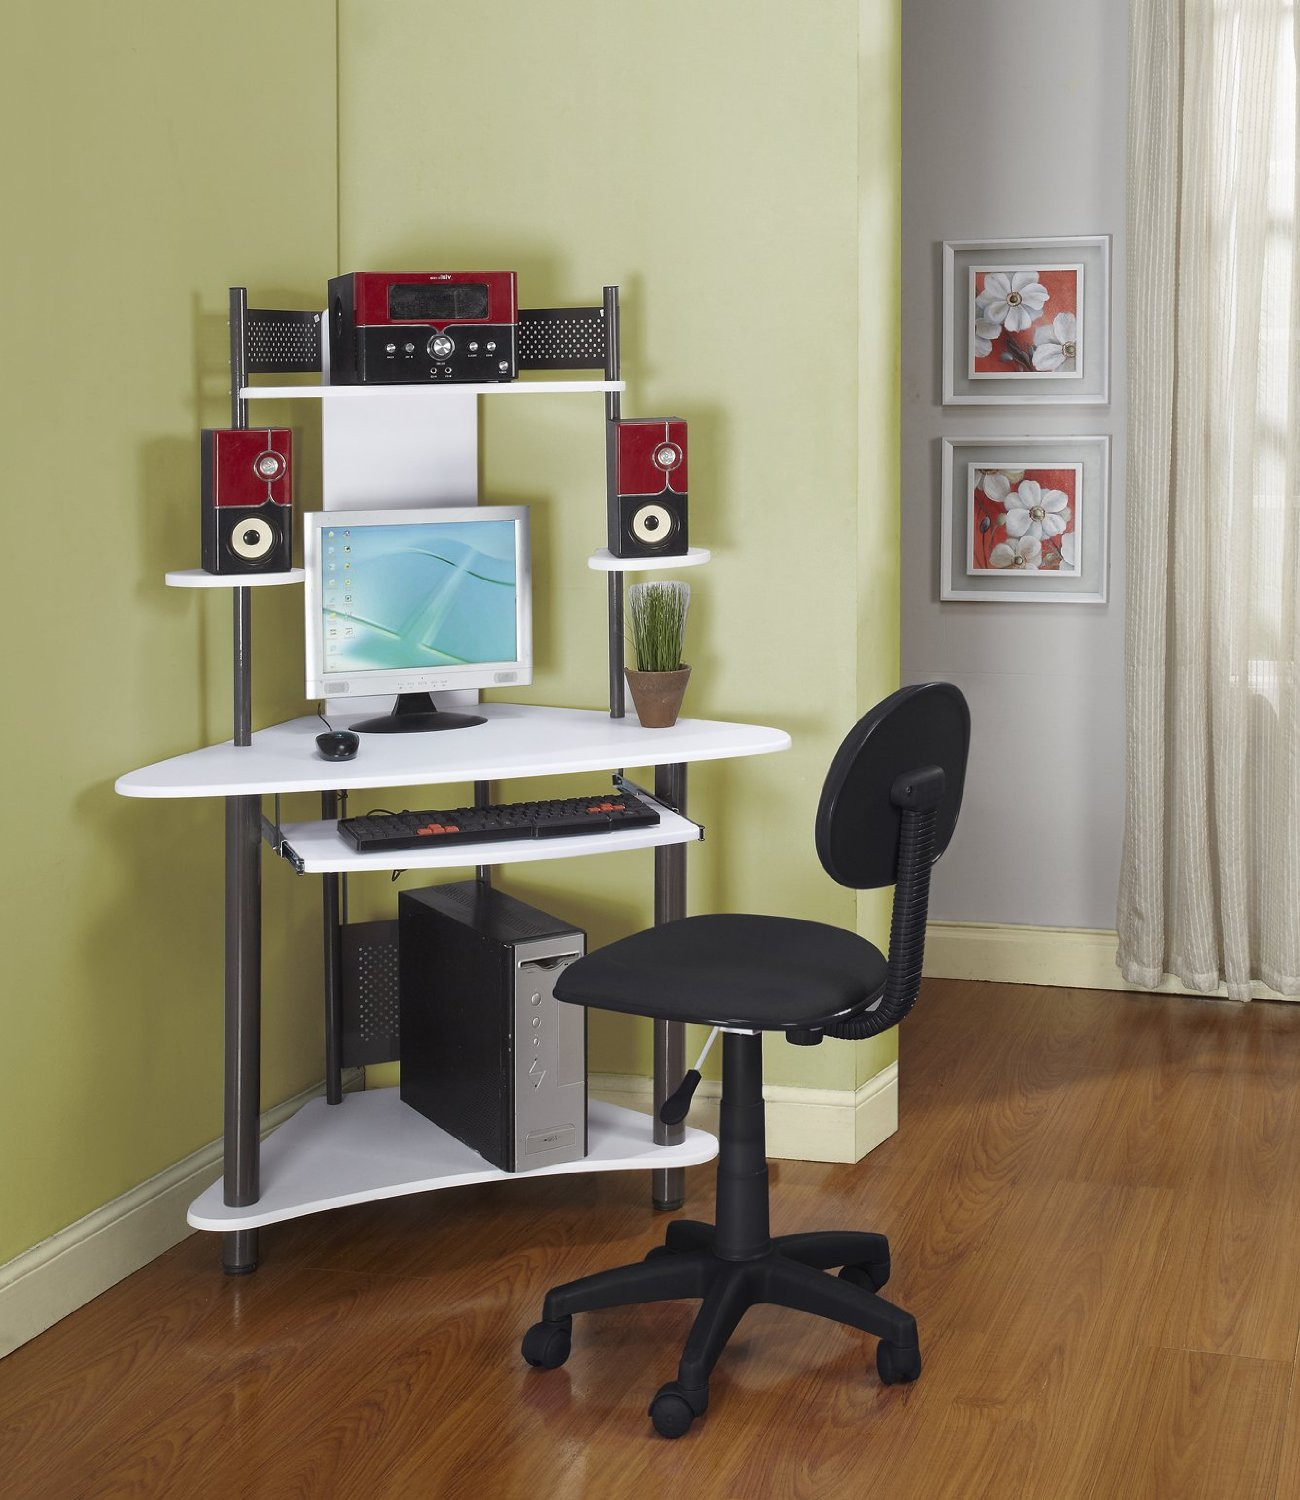 Computer Desk For Small Bedroom
 Cheap Corner Desks Bud Friendly and Room Beautifier